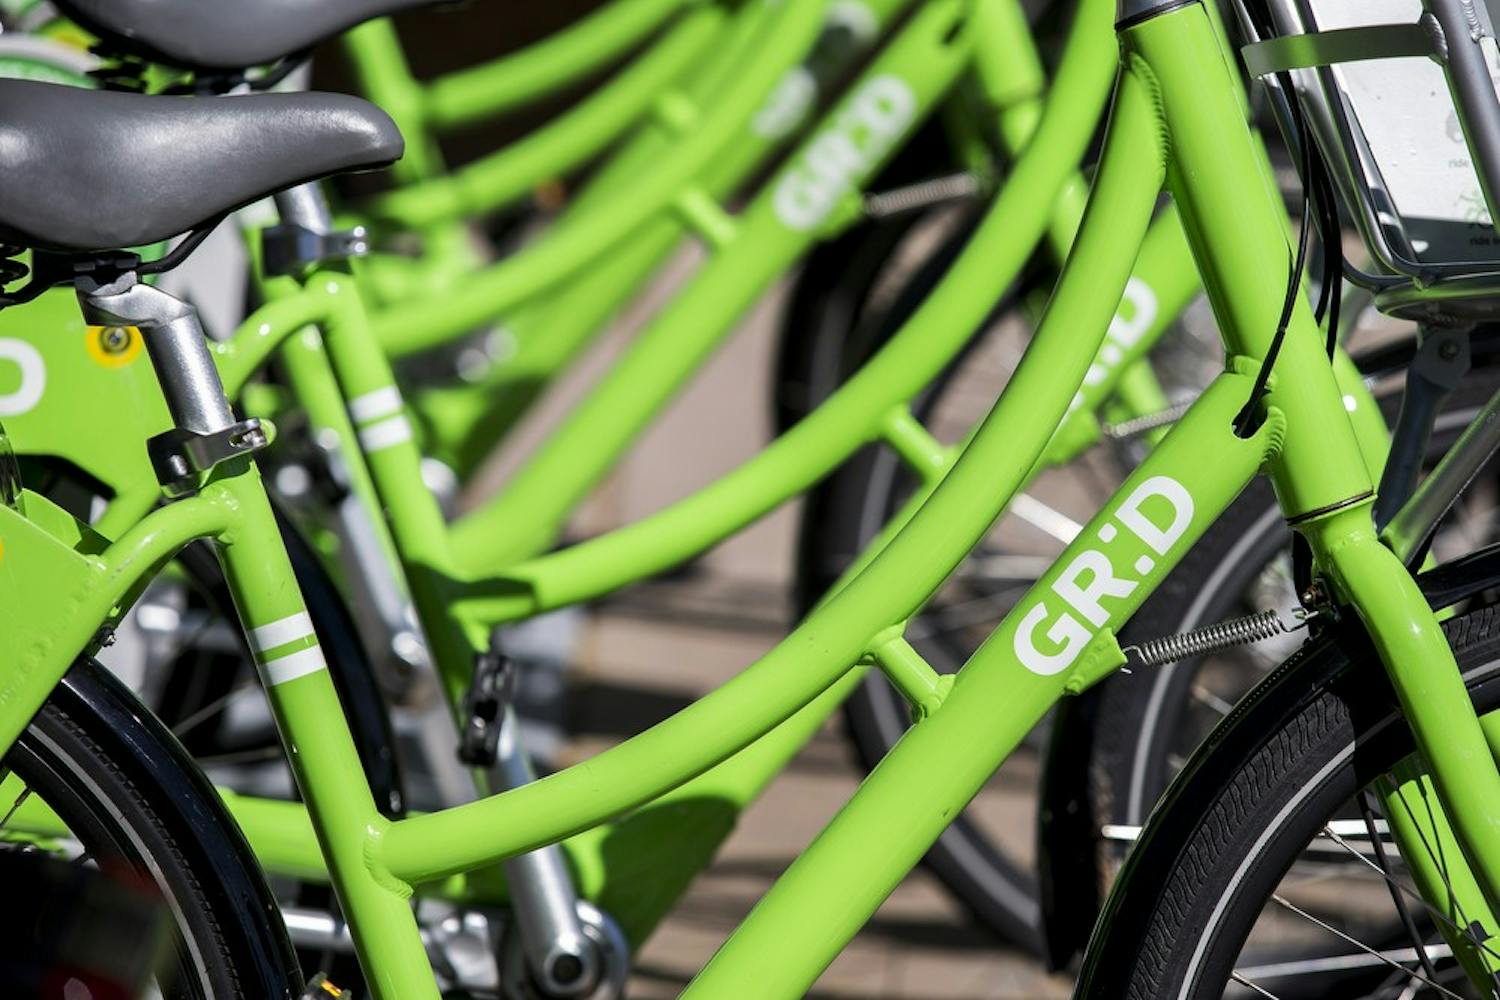 A row of GR:D Bikes sits on the corner of 5th Street and Van Buren Street in downtown Phoenix on Friday, Sept. 25, 2015. The Phoenix City Council recently voted to expand the bike-sharing program for a total of 500 bikes across the city.